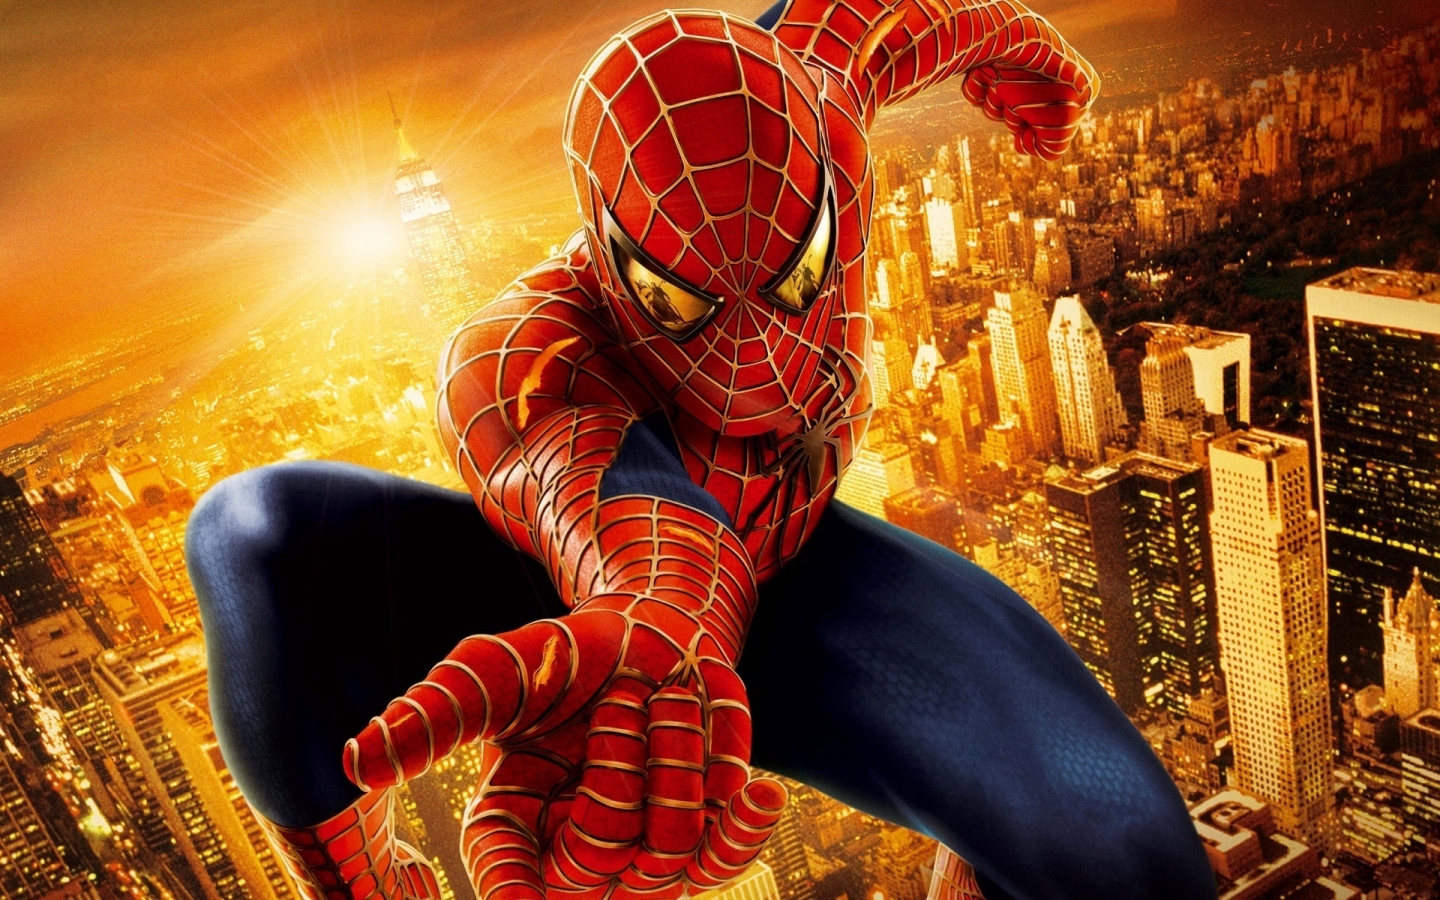 Spiderman Up for 1440 x 900 widescreen resolution